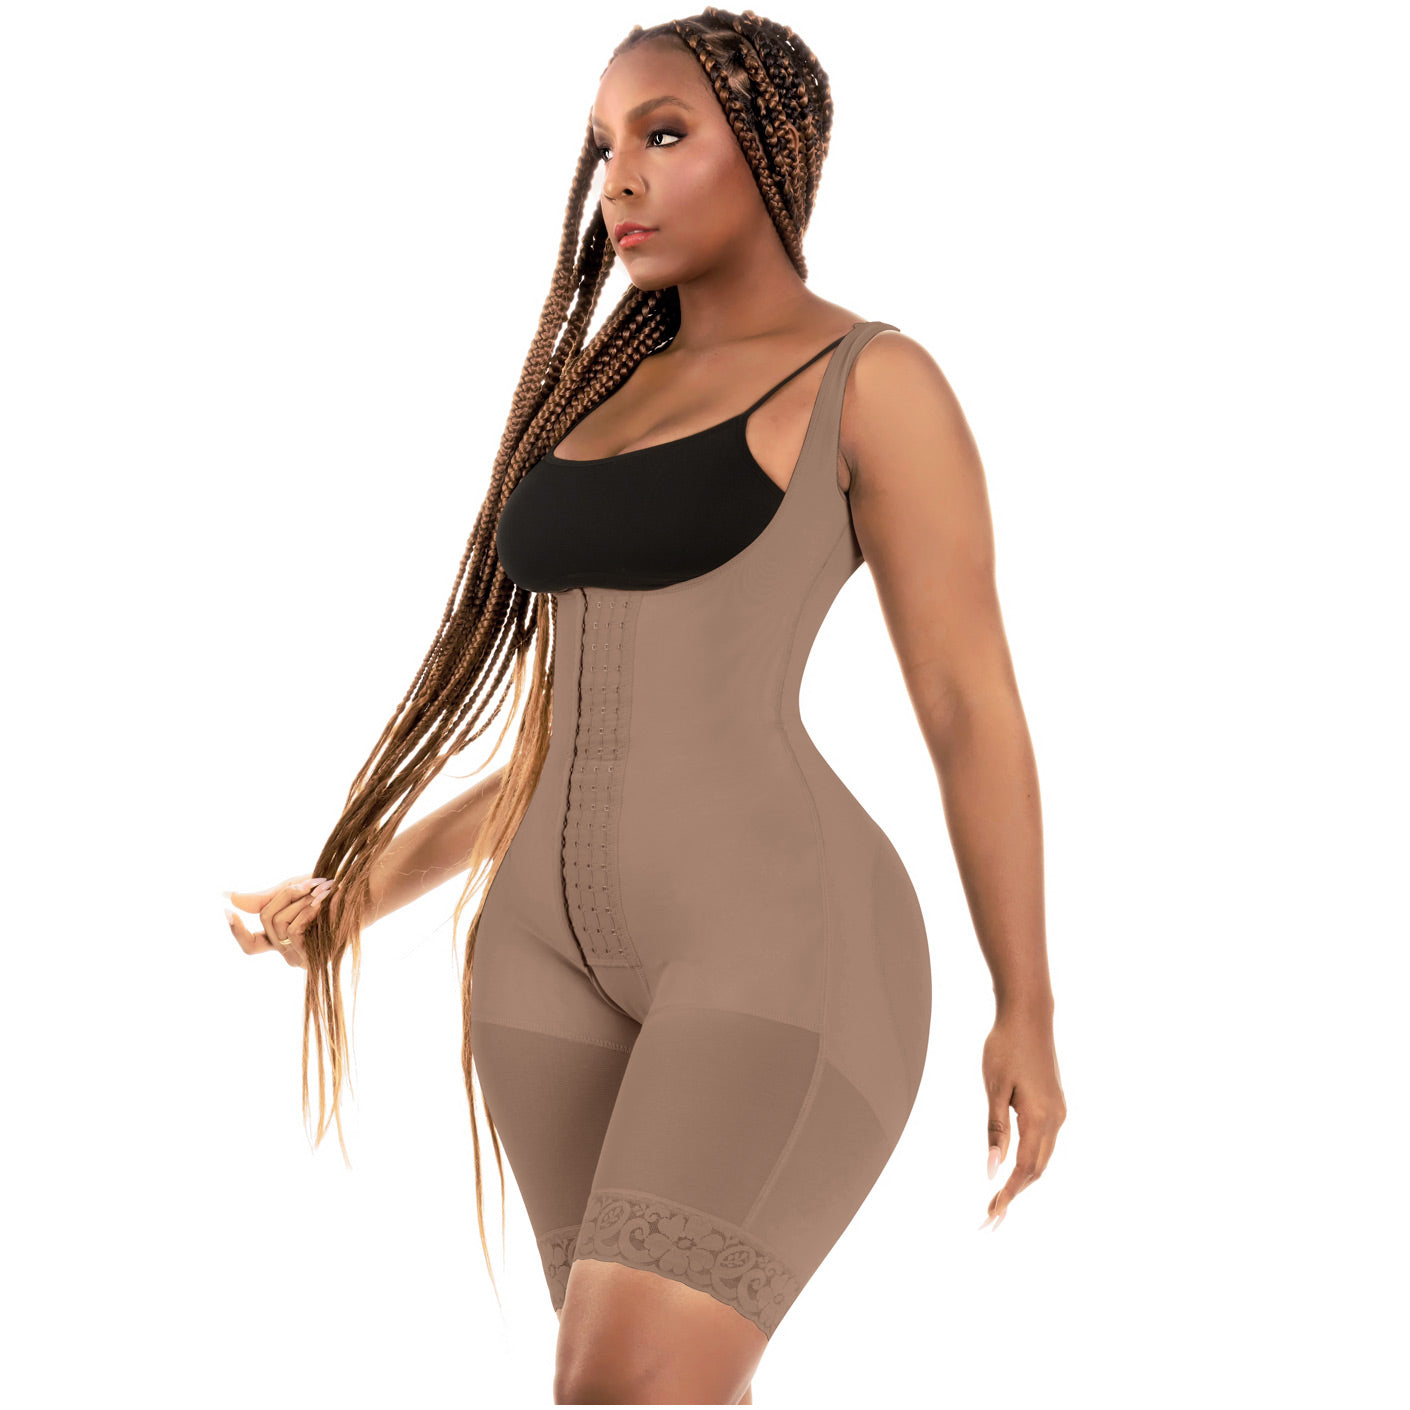 Shapewear for chubby thighs?